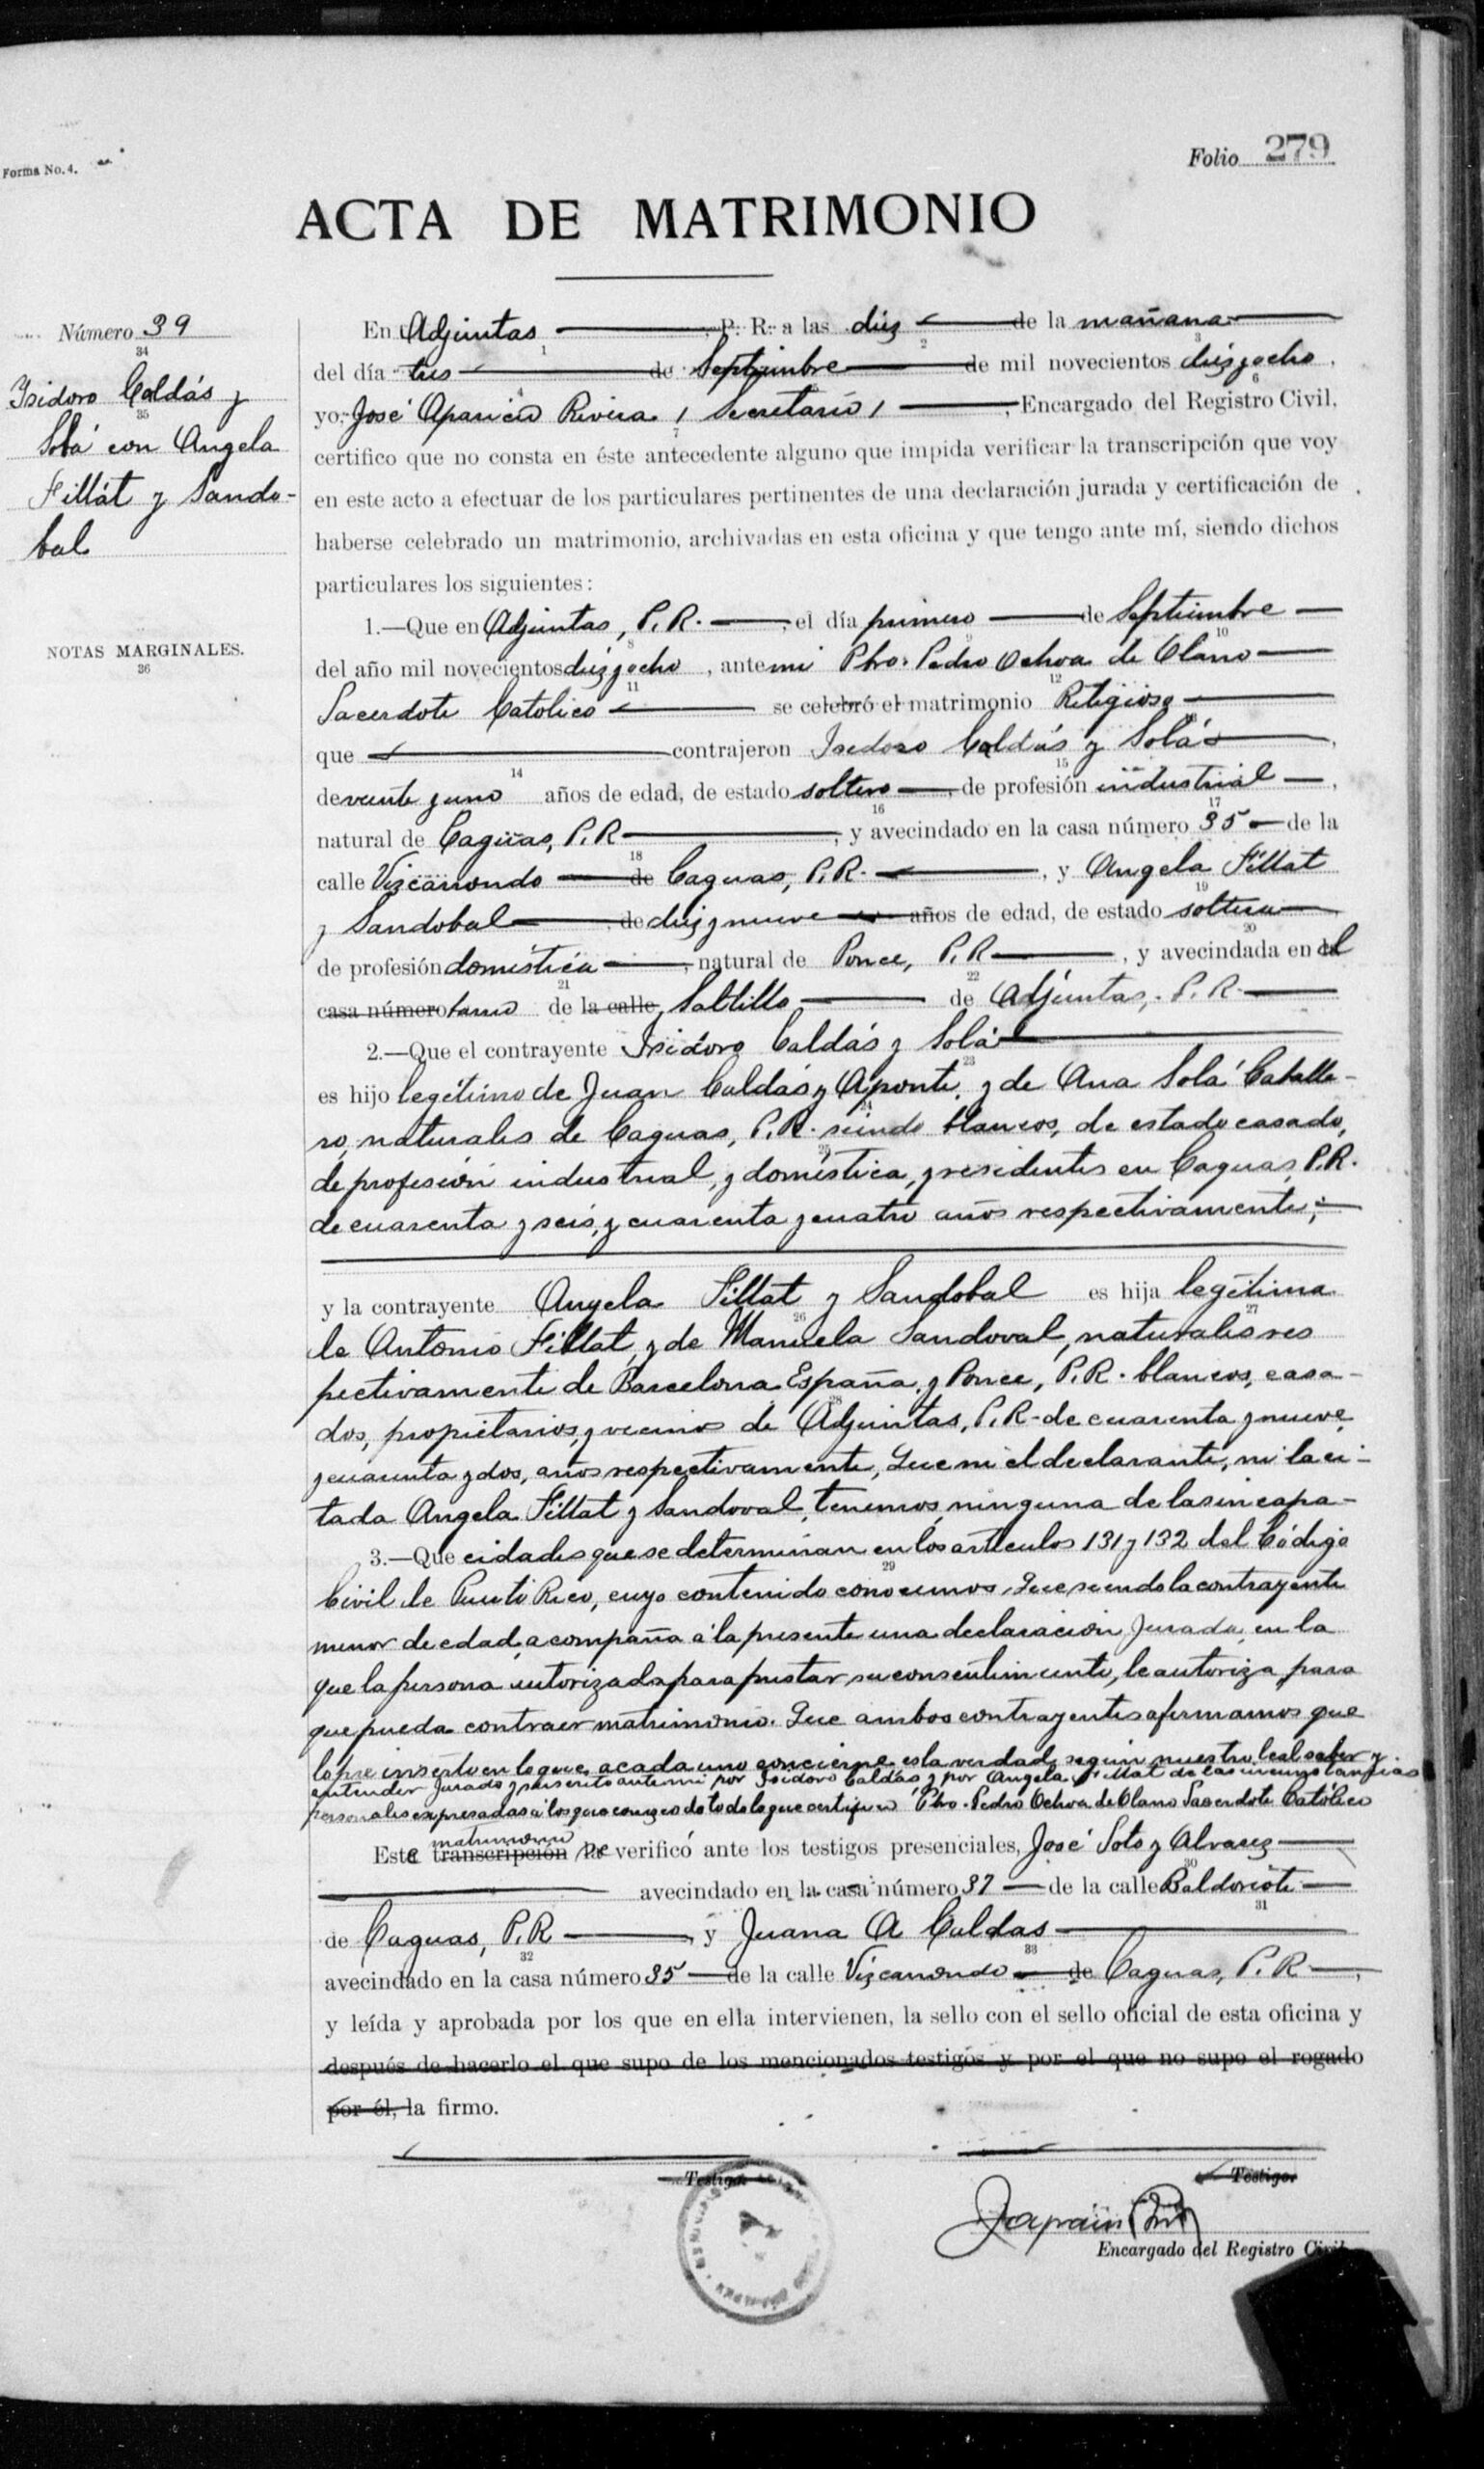 Marriage registration document for Isidoro Caldas Solá and Angela Fillat Sandoval, 1 September 1918, Caguas, Puerto RIco